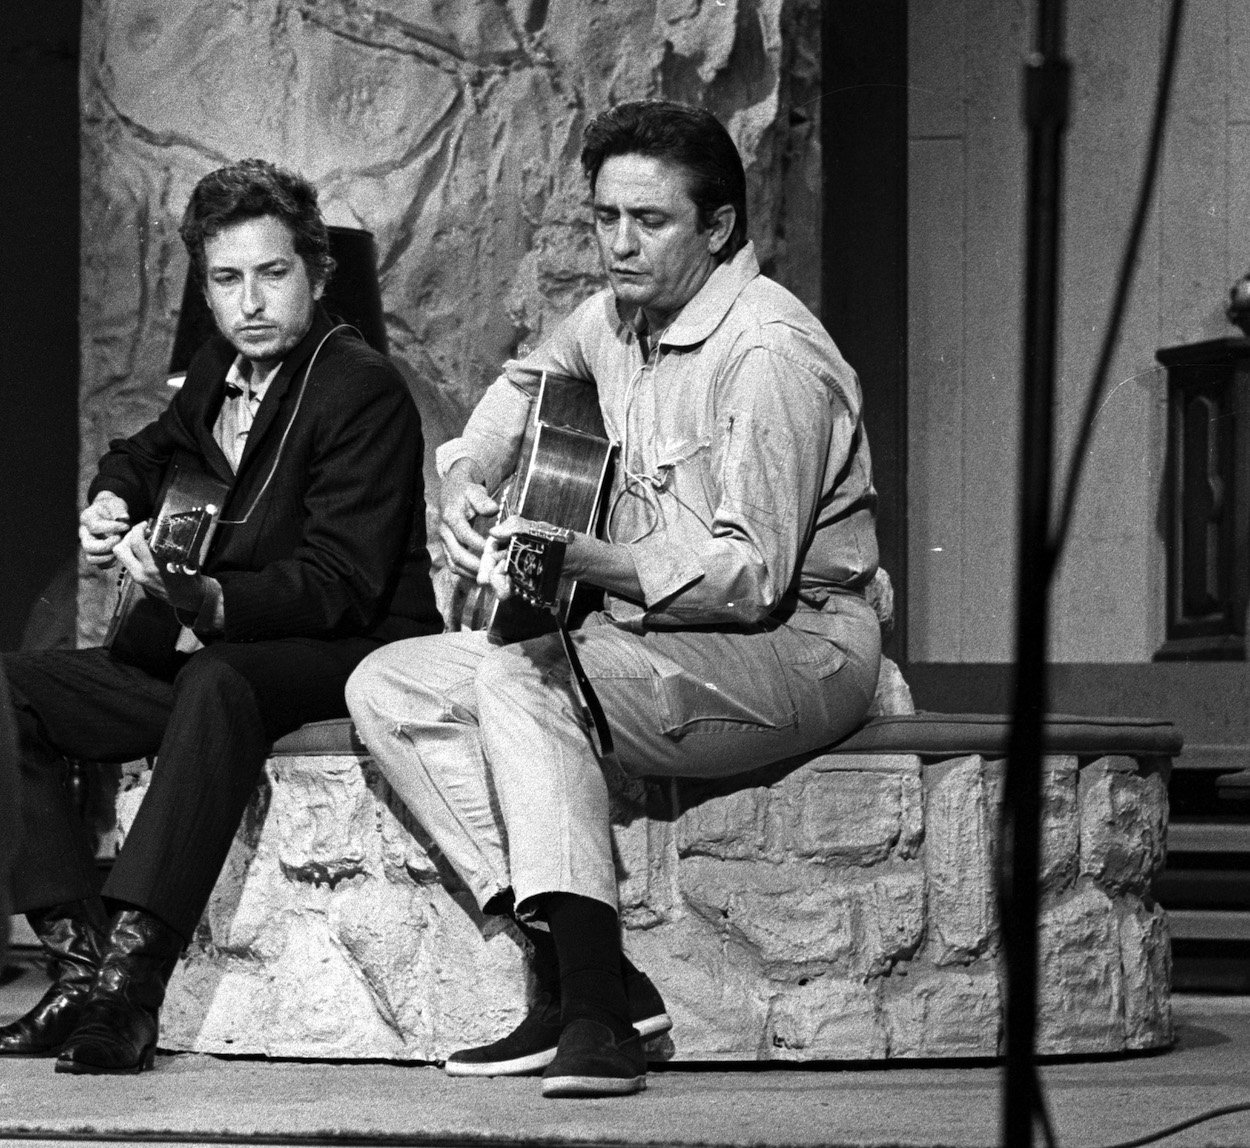 Bob Dylan (left) and Johnny Cash share a moment off camera in 1969 during Dylan's appearance on Cash's TV show.